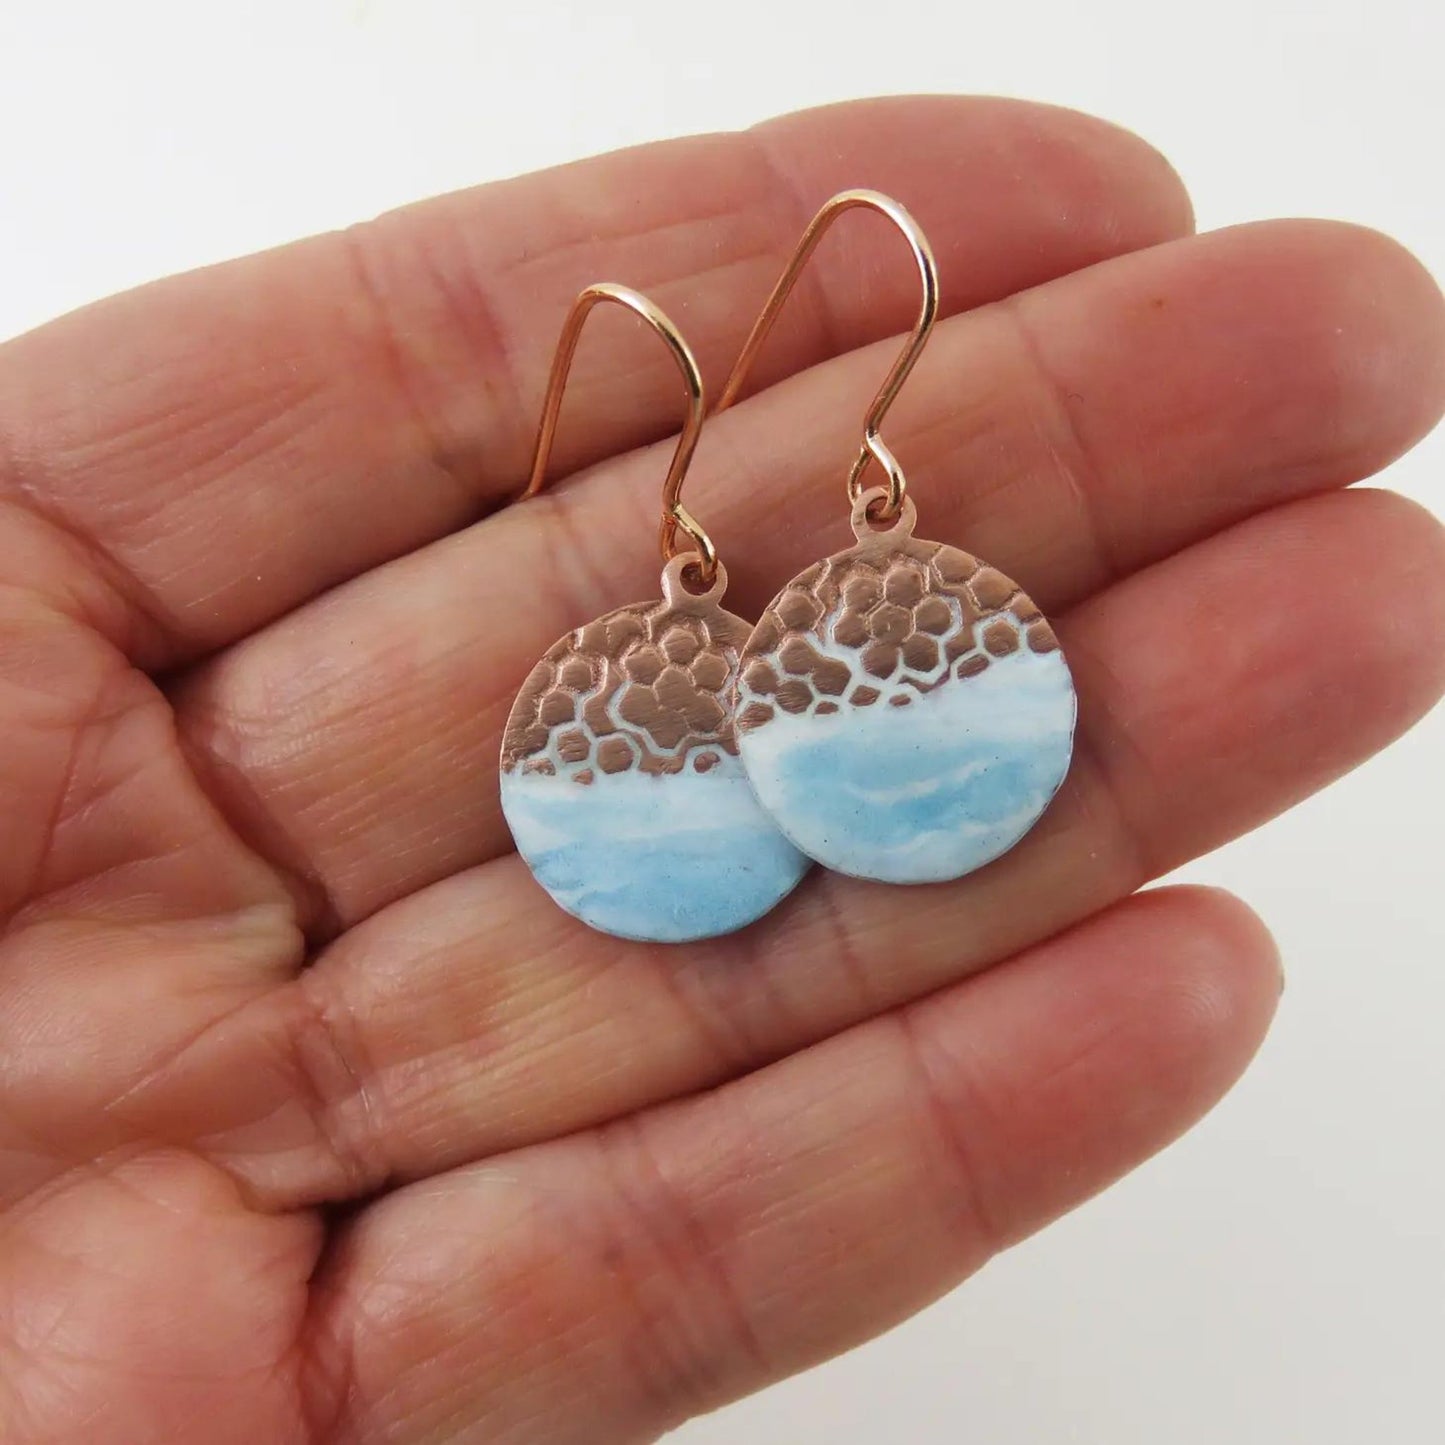 Enamel and Textured Copper Dangle Earrings - The Little Jewellery Company